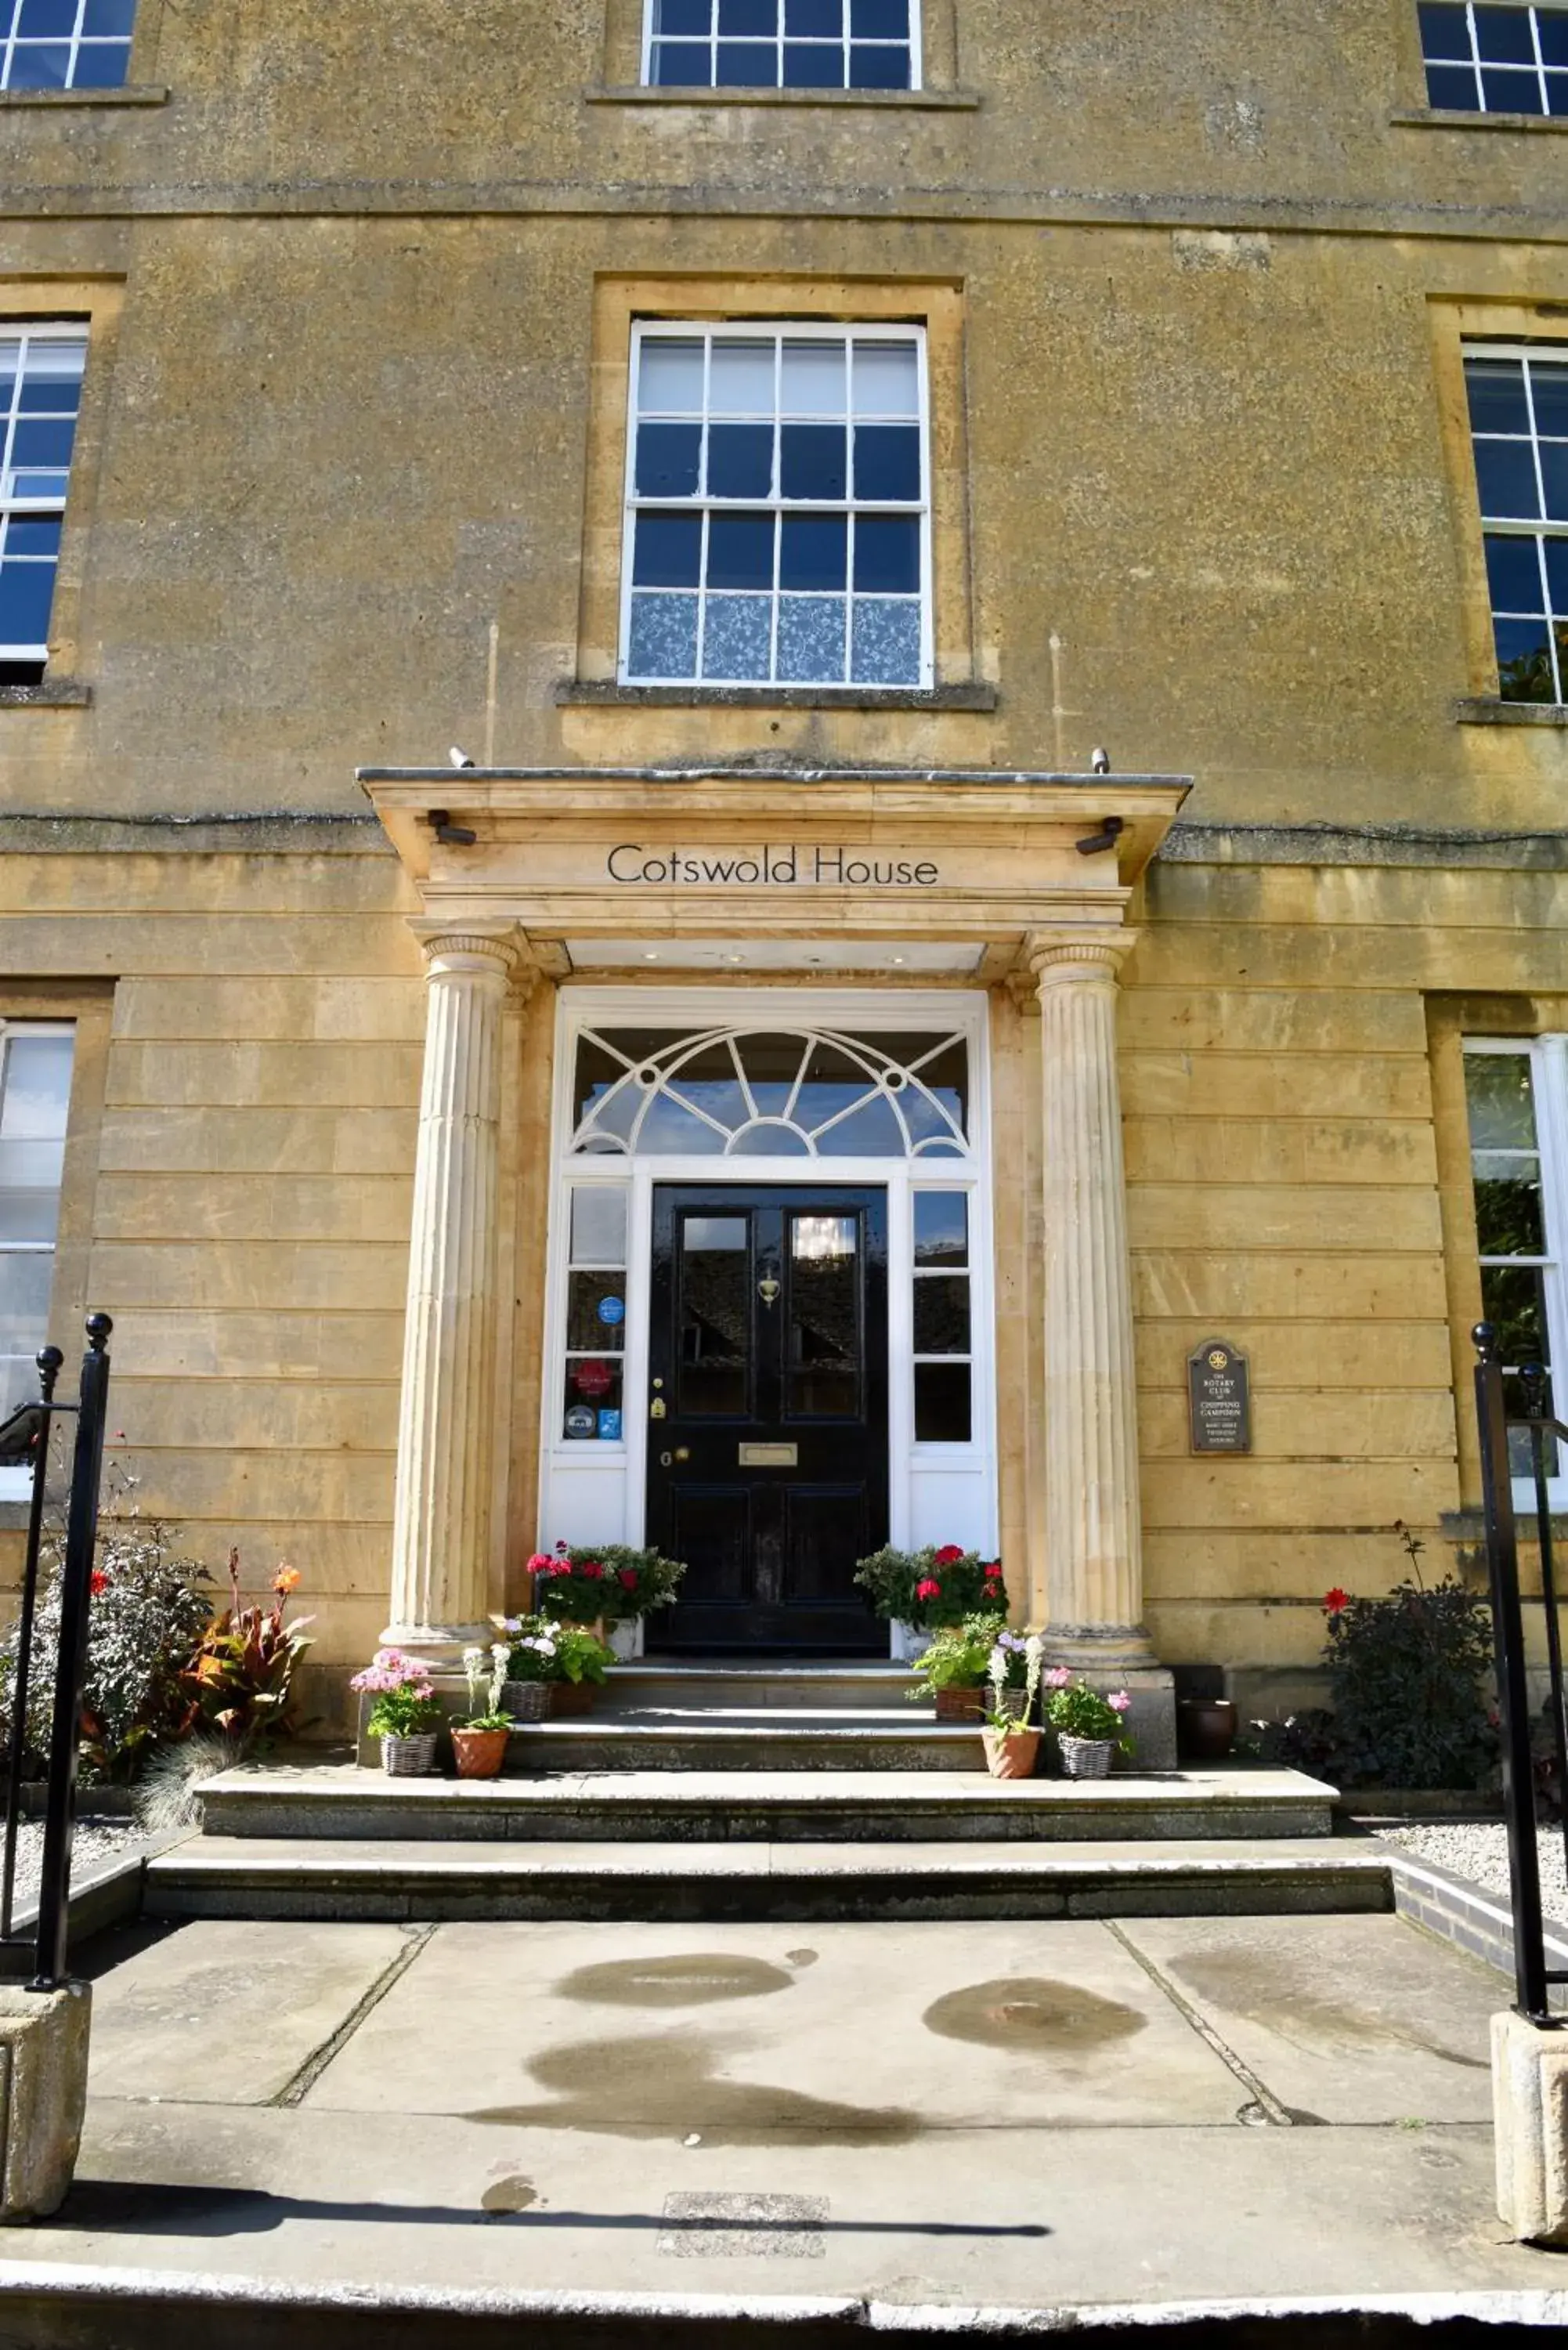 Facade/entrance in Cotswold House Hotel and Spa - "A Bespoke Hotel"